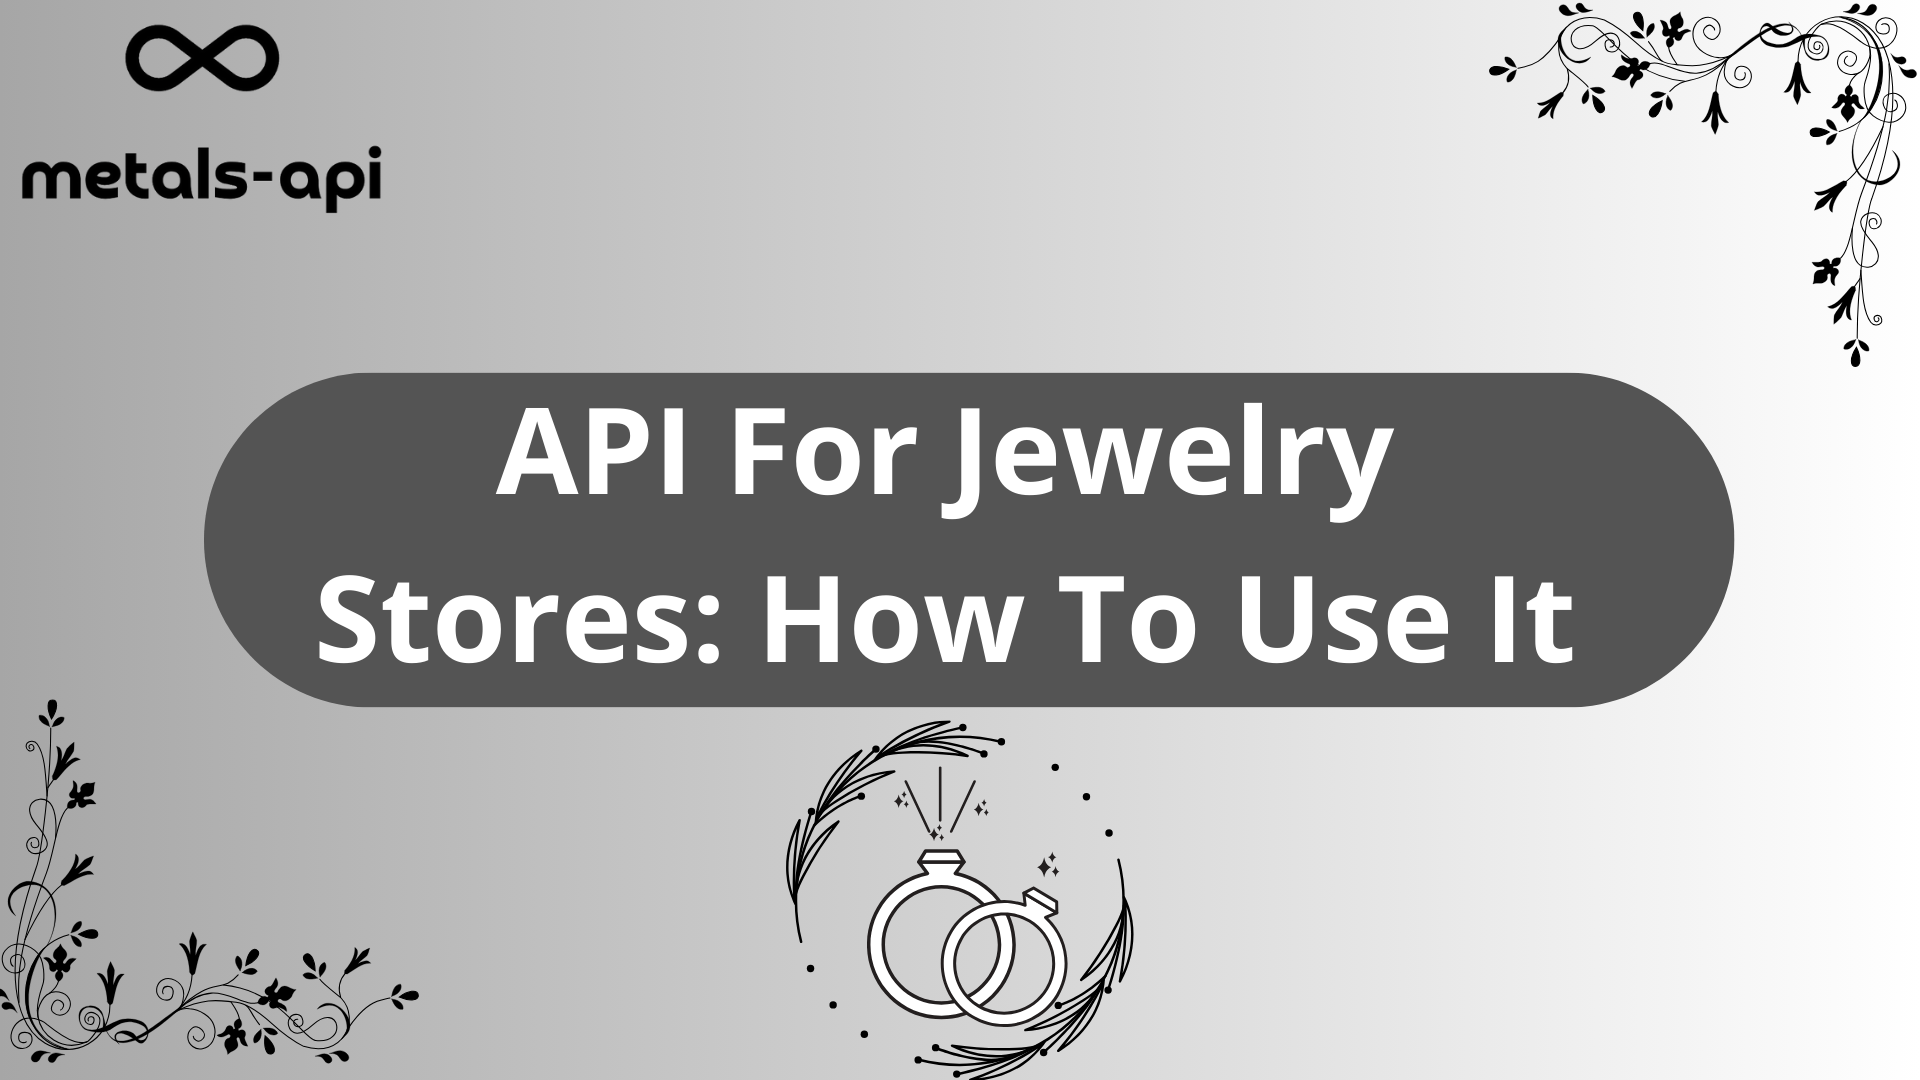 API For Jewelry Stores: How To Use It